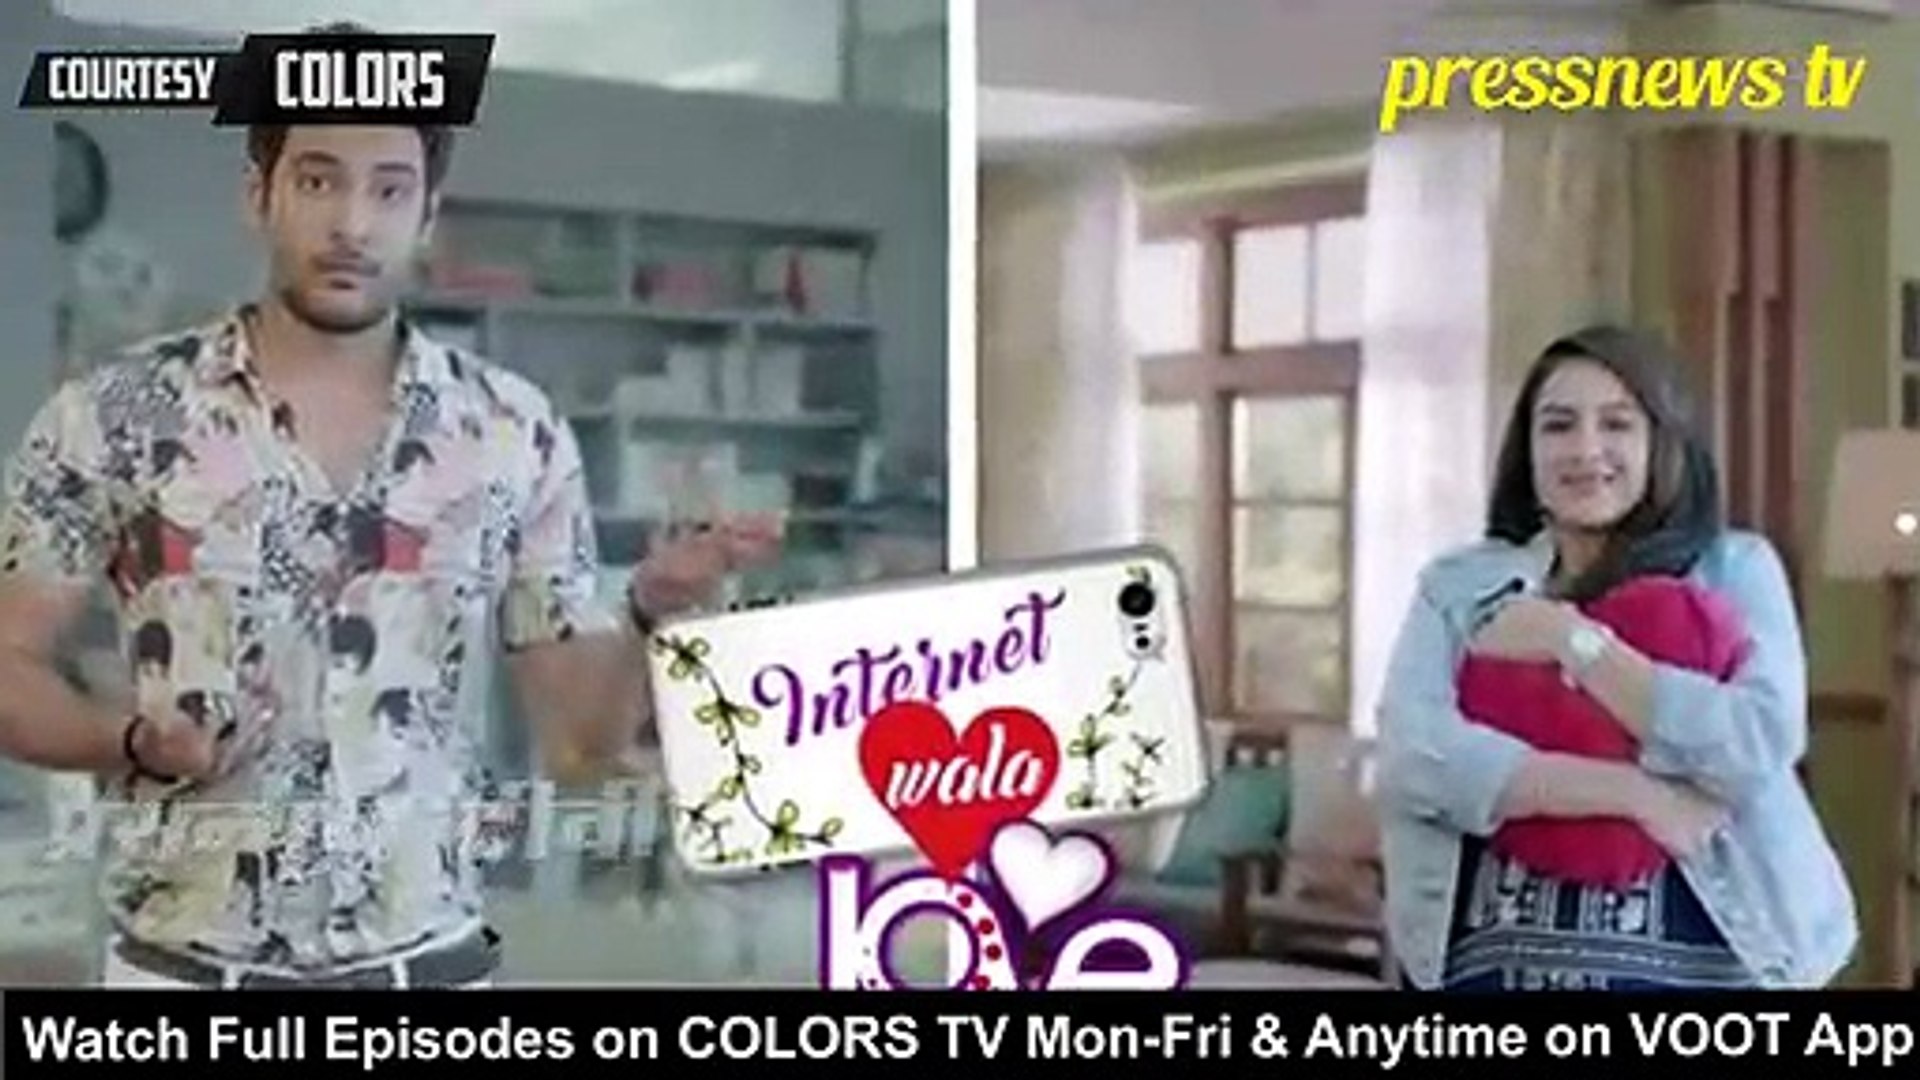 Internet Wala Love 14th January 2019 Colors Tv Show News Video Dailymotion Roopa and the entire family are devastated after hearing this. internet wala love 14th january 2019 colors tv show news